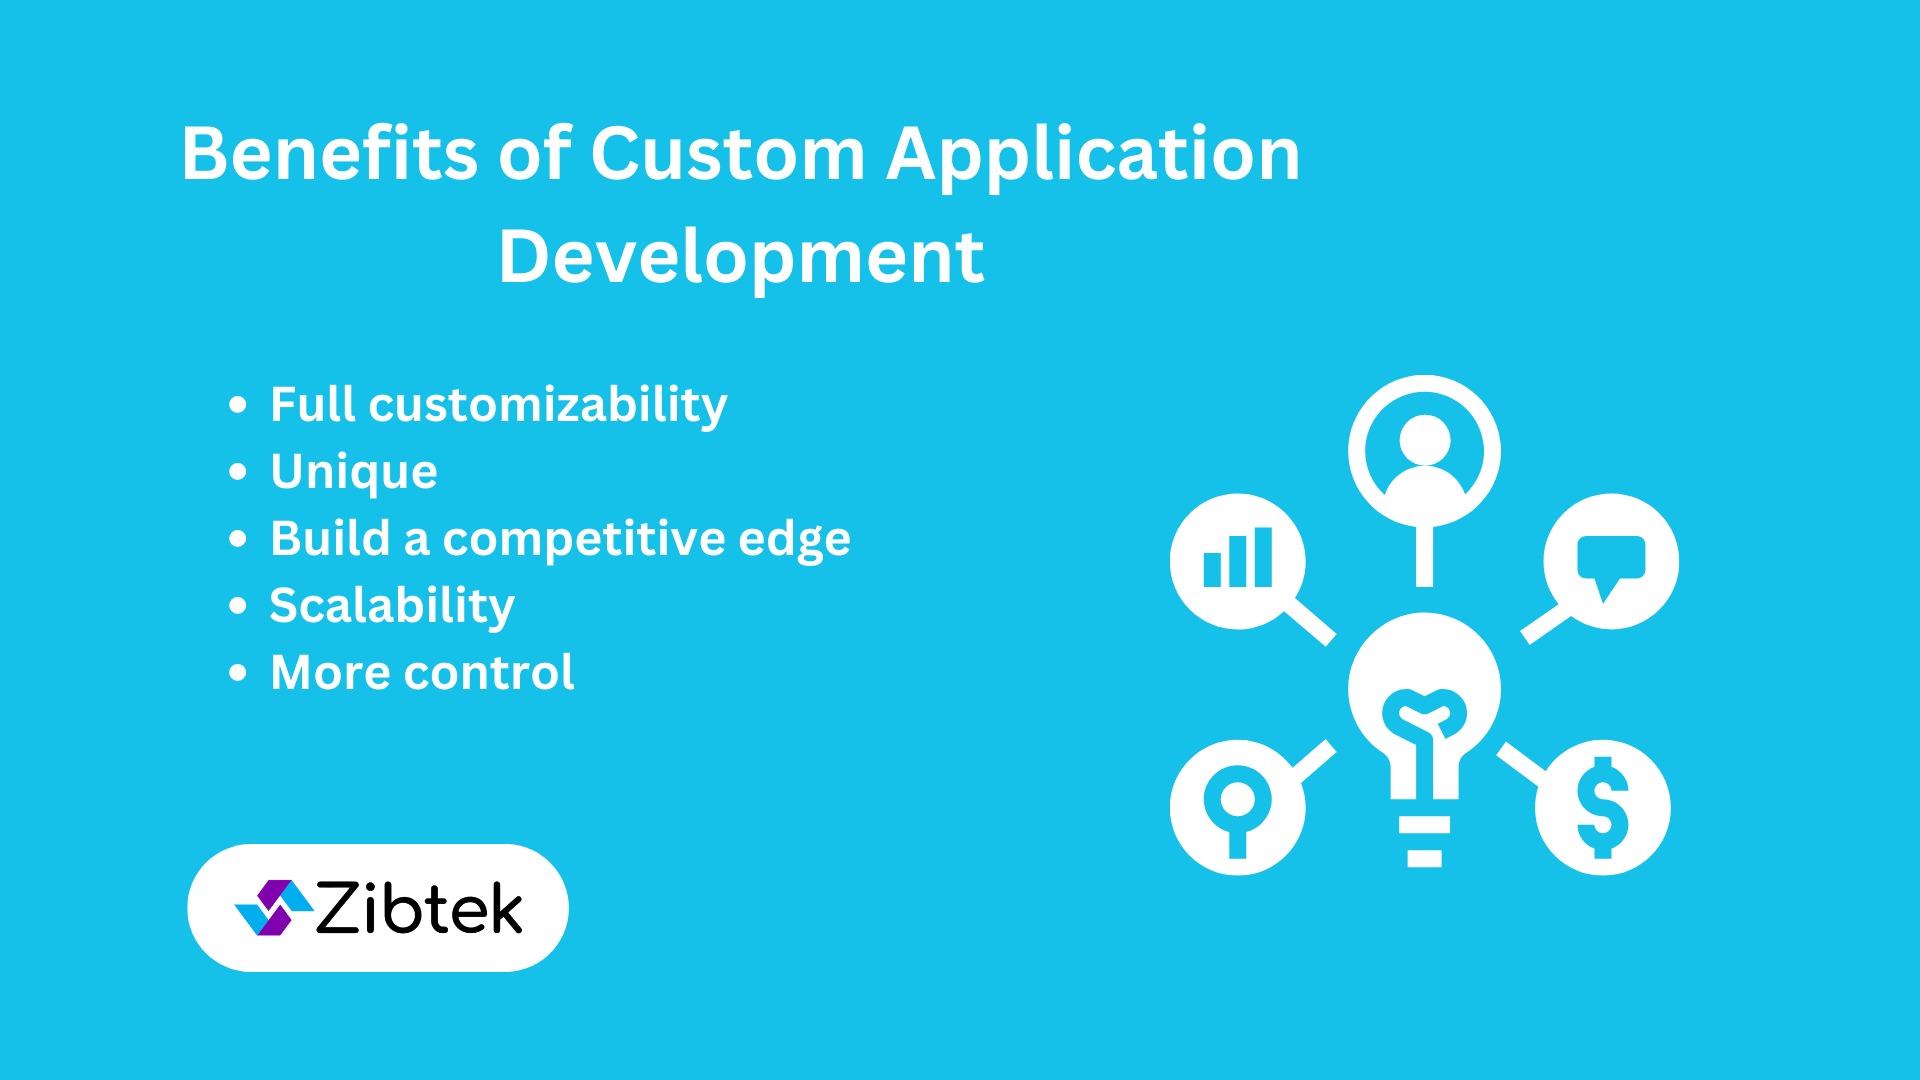 Chart which lists the benefits of custom application development